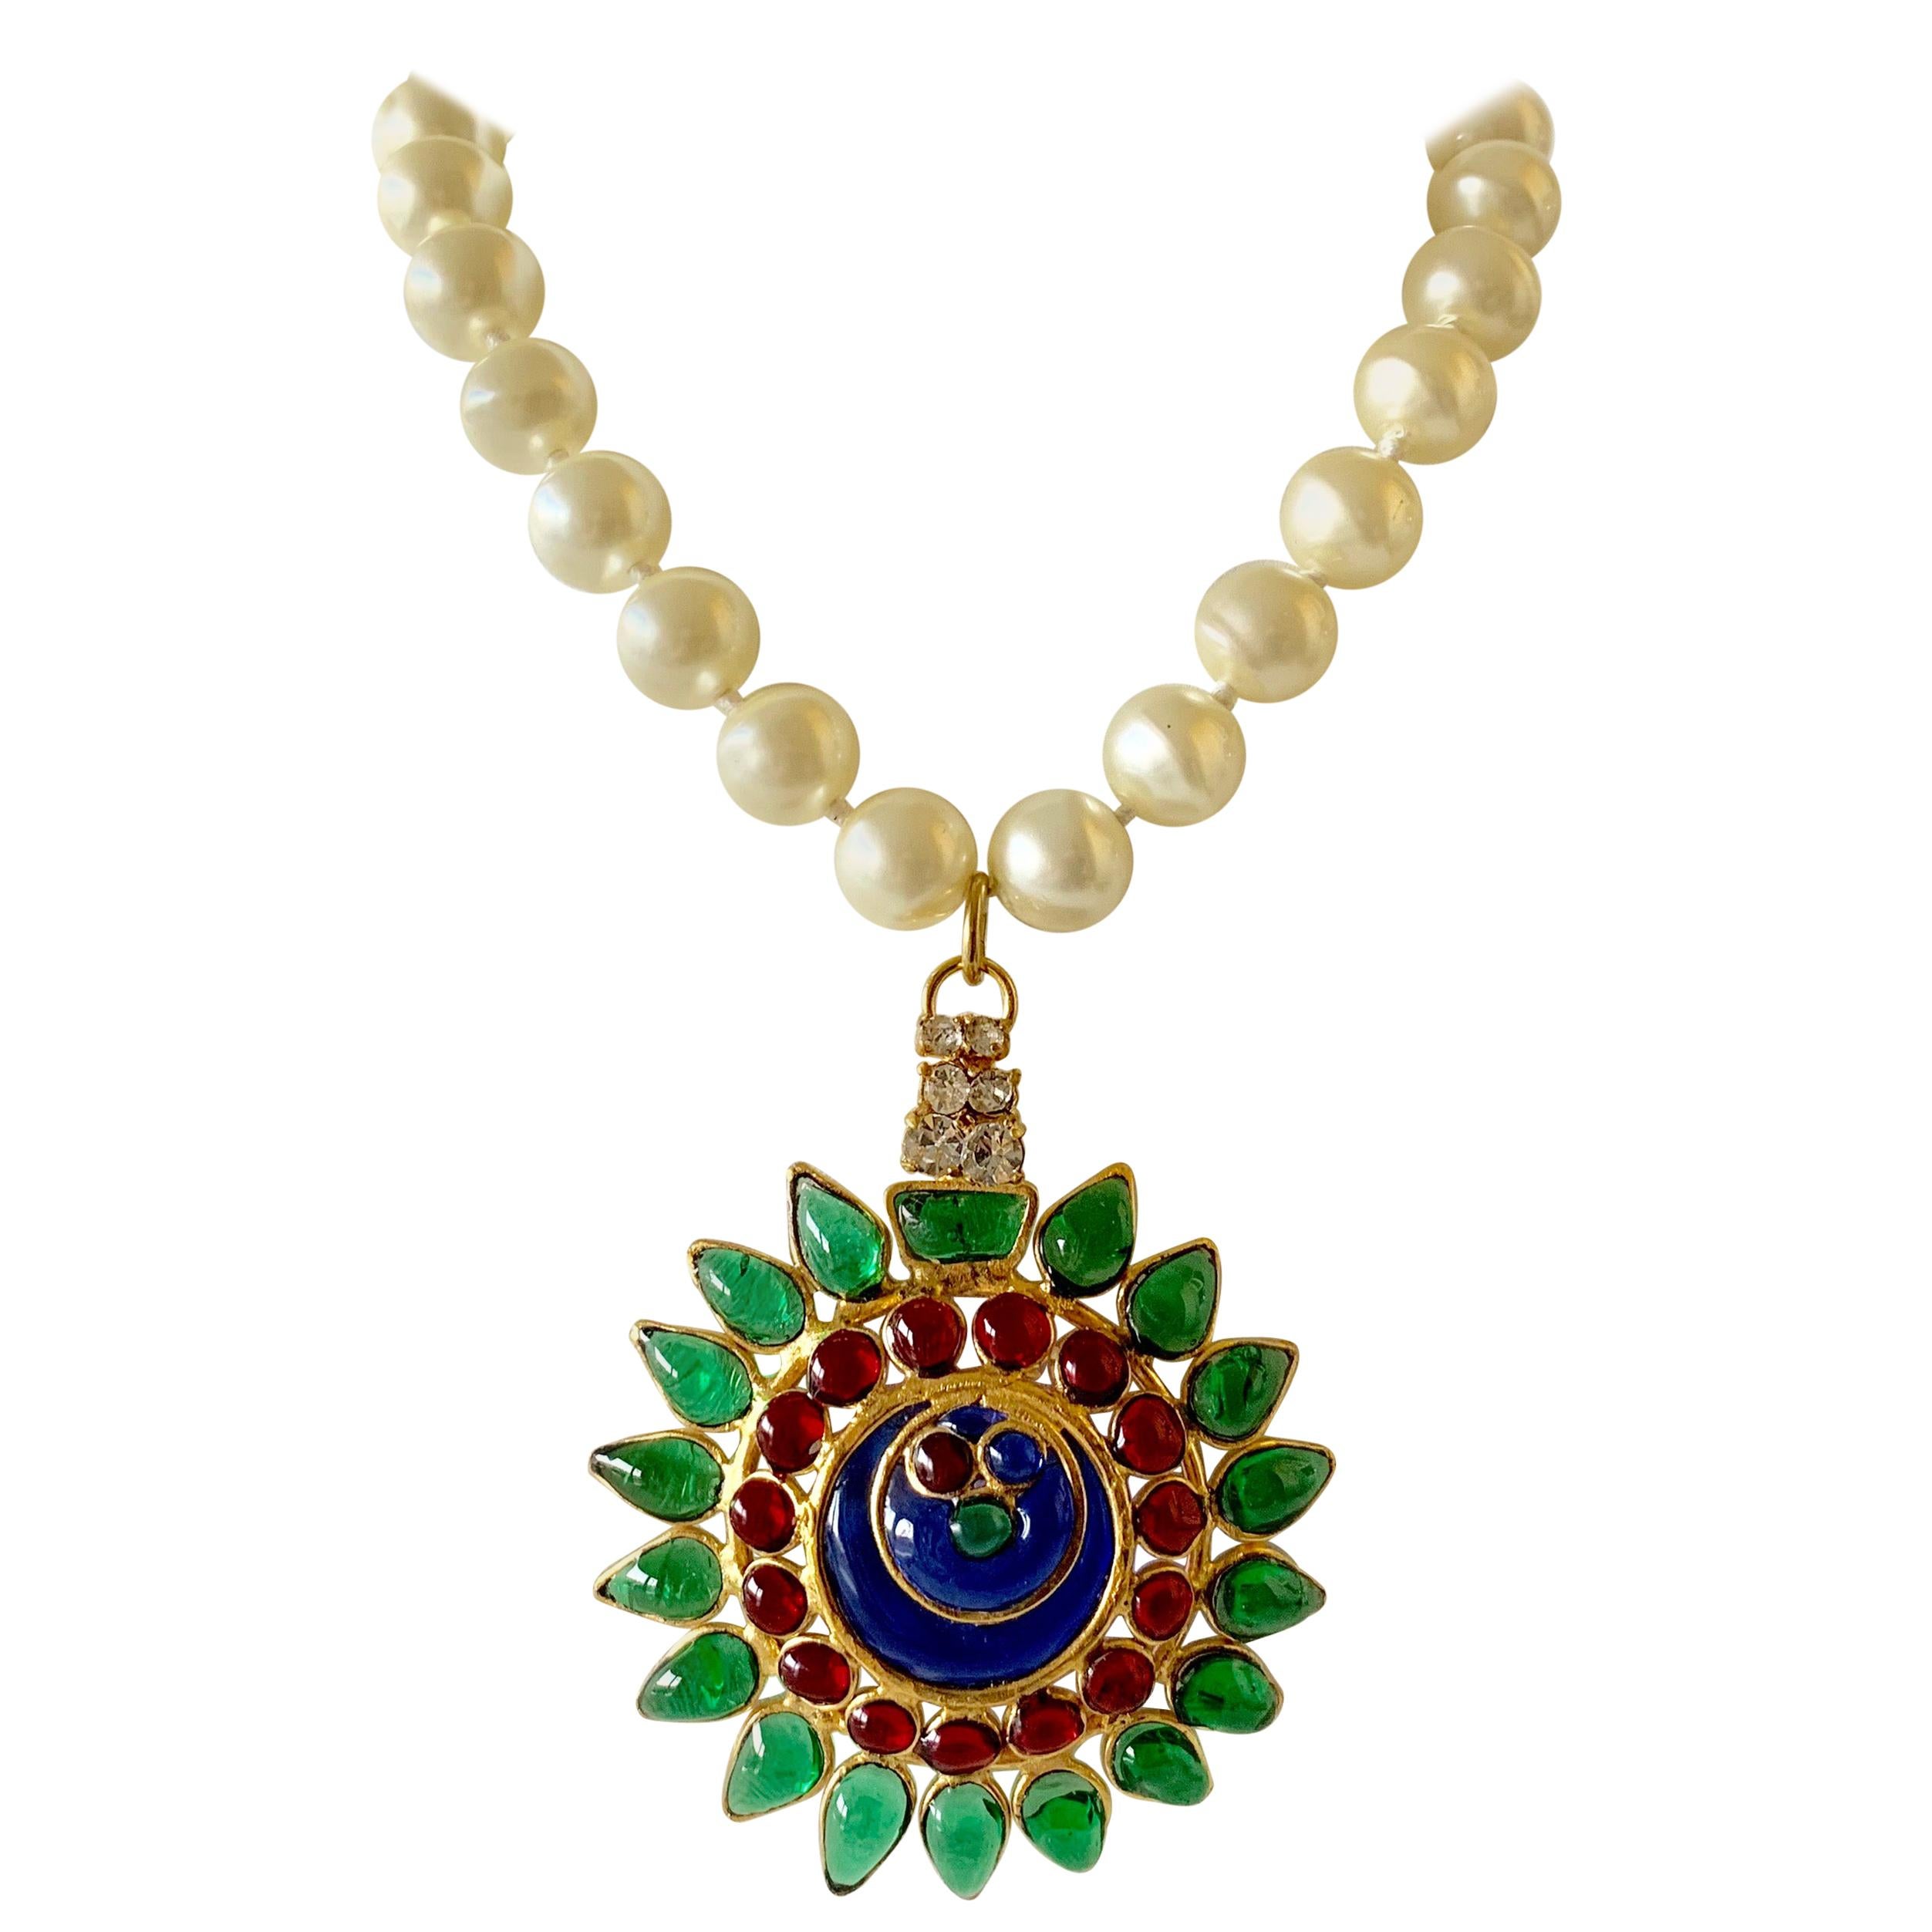 French Mughal Pate de Verre Pearl Statement "Collier" Necklace